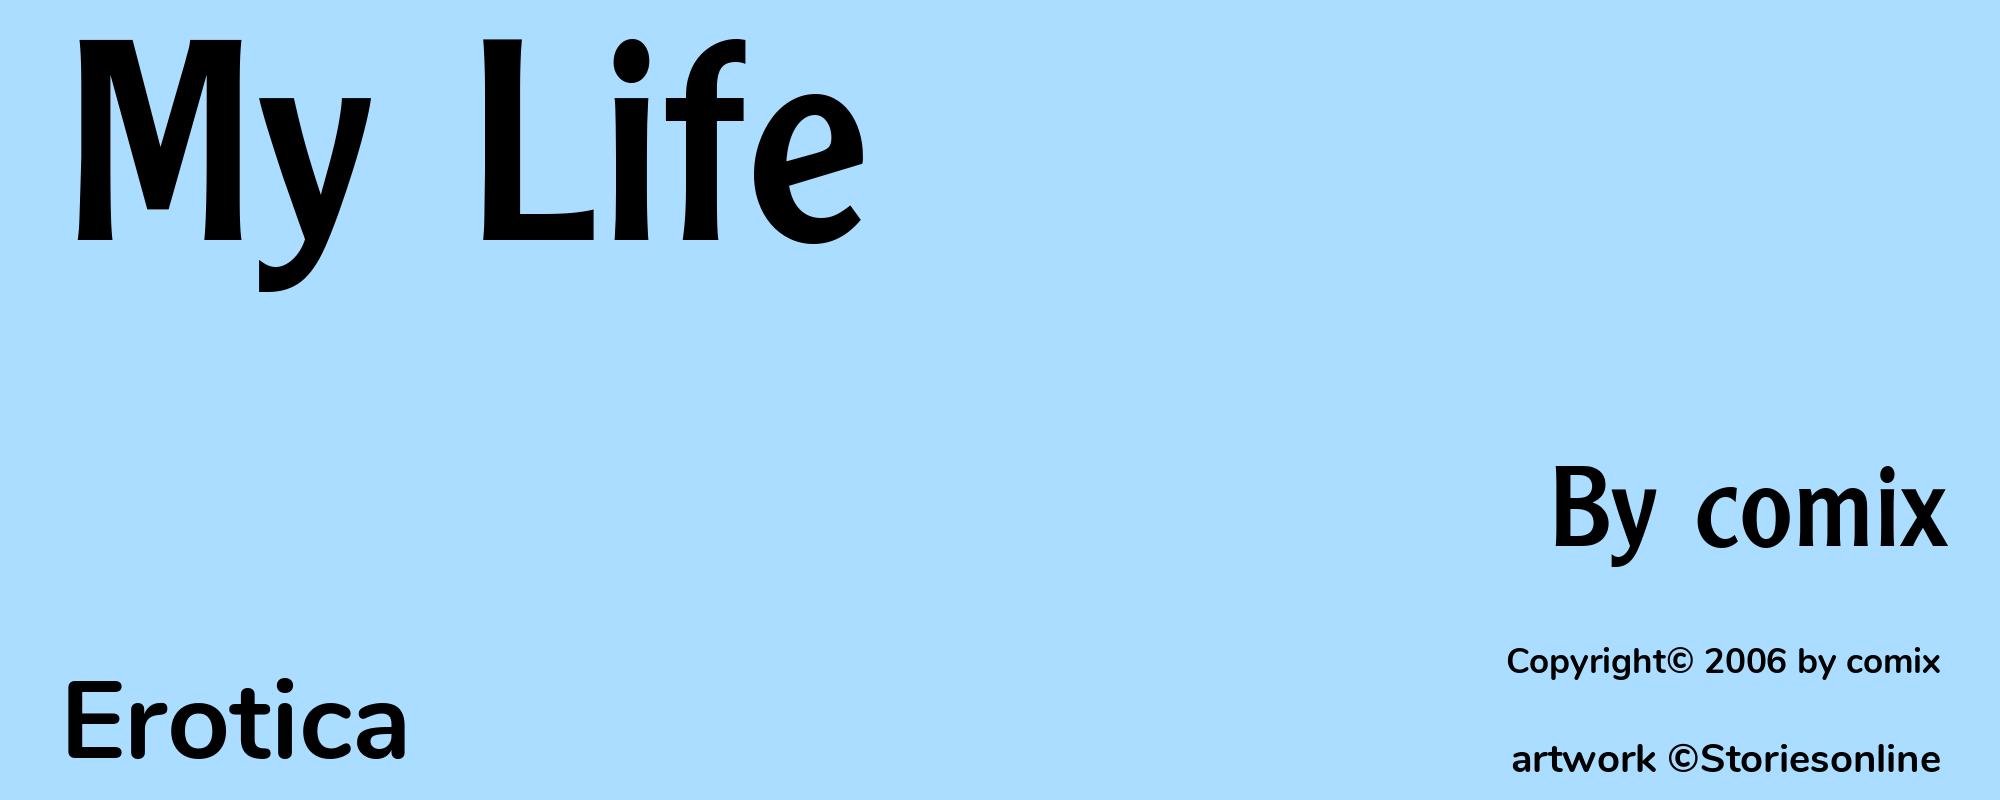 My Life - Cover